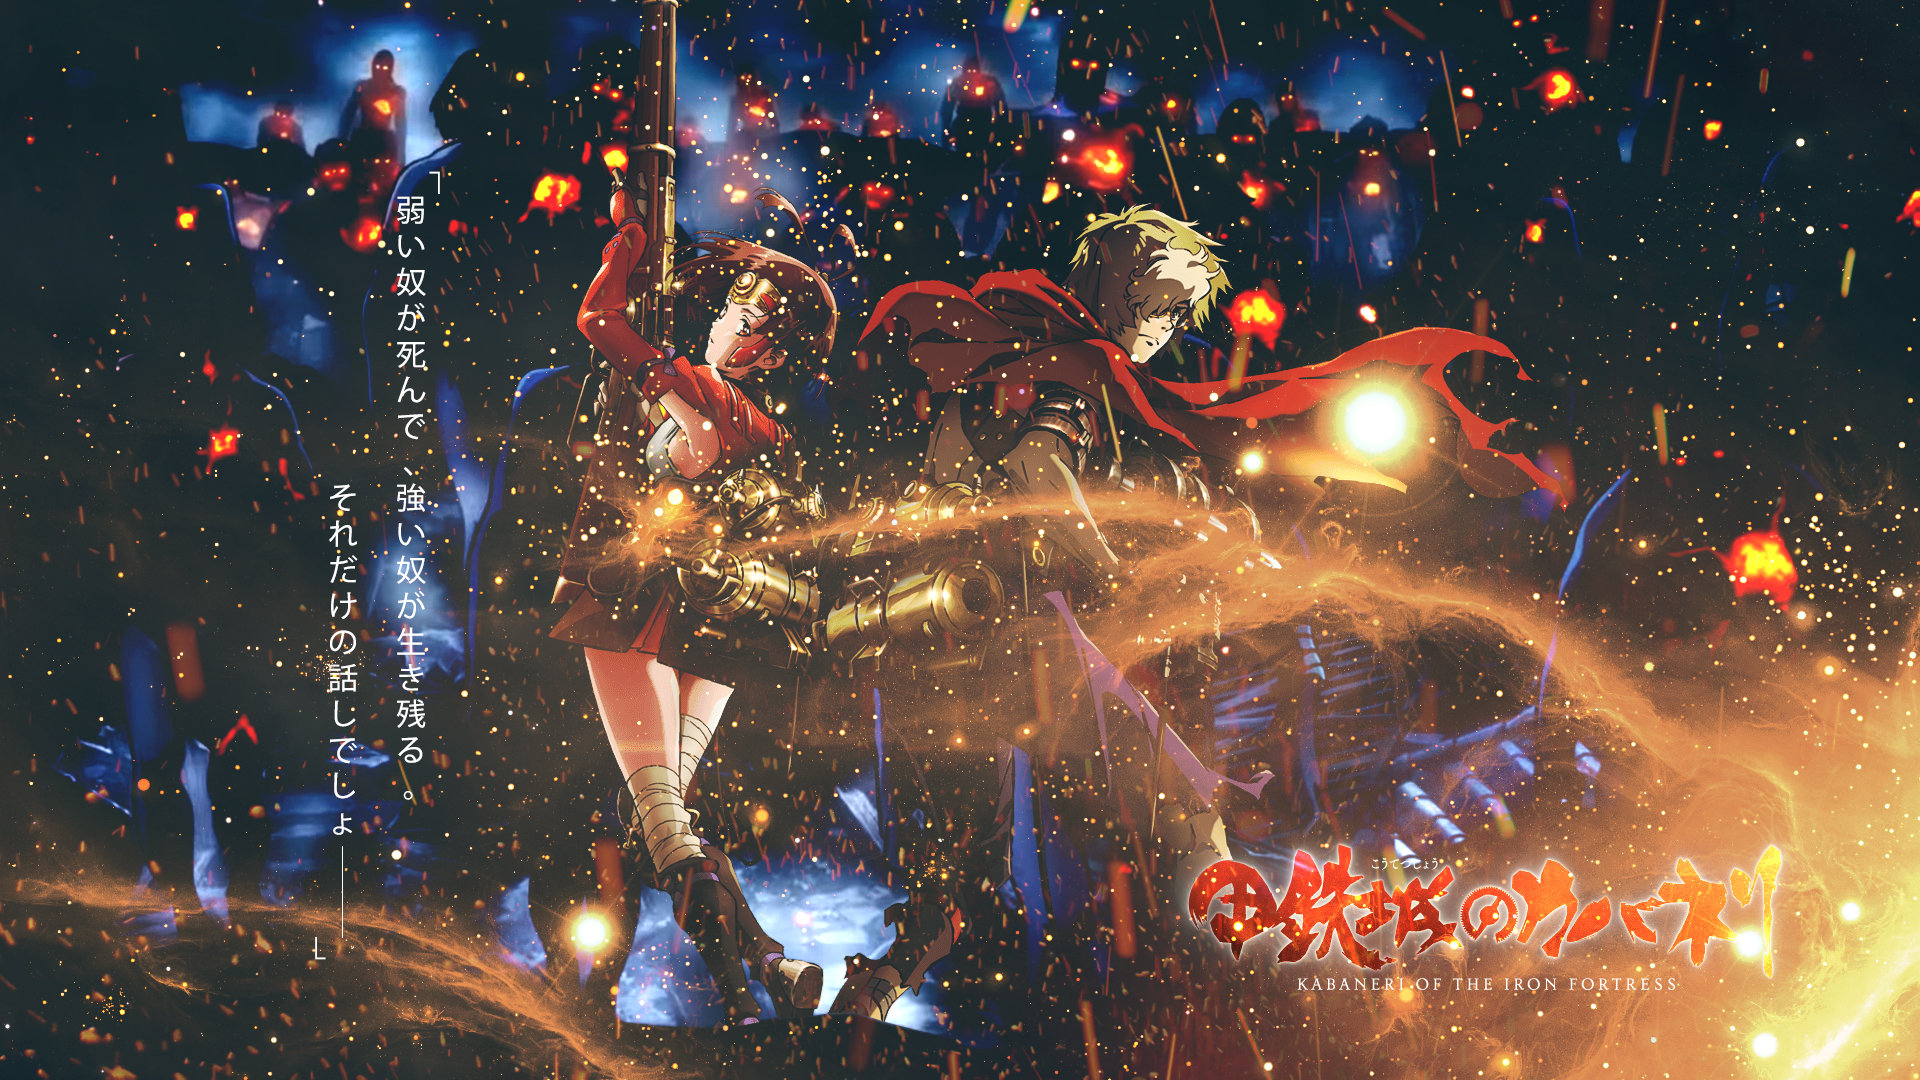 Download hd 1920x1080 Kabaneri Of The Iron Fortress desktop background ID:116861 for free